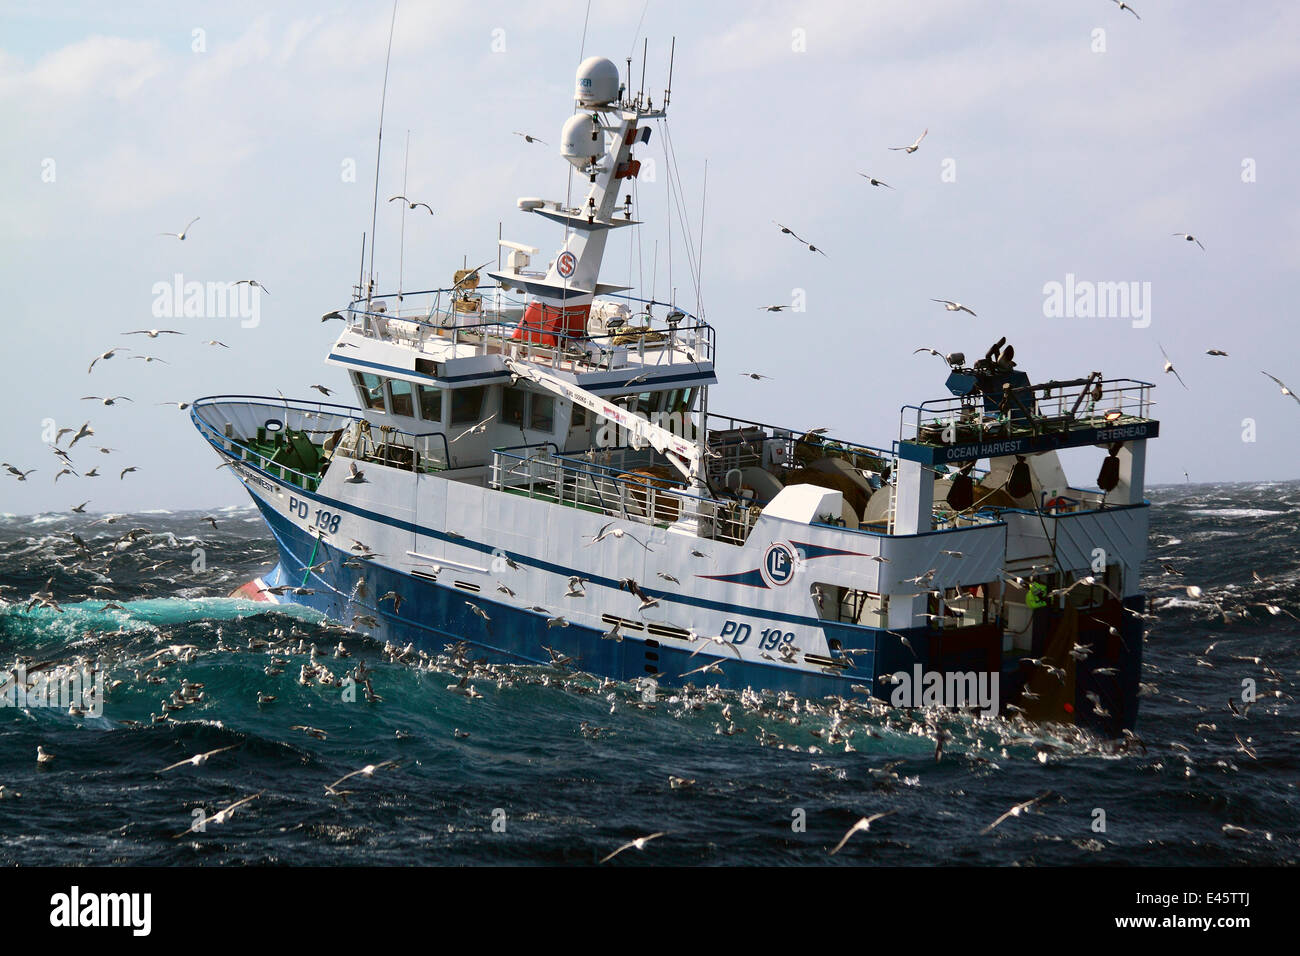 Fishing trawler surrounded by seabirds as the net is hauled onboard. North Sea, September 2010. Property released. Stock Photo